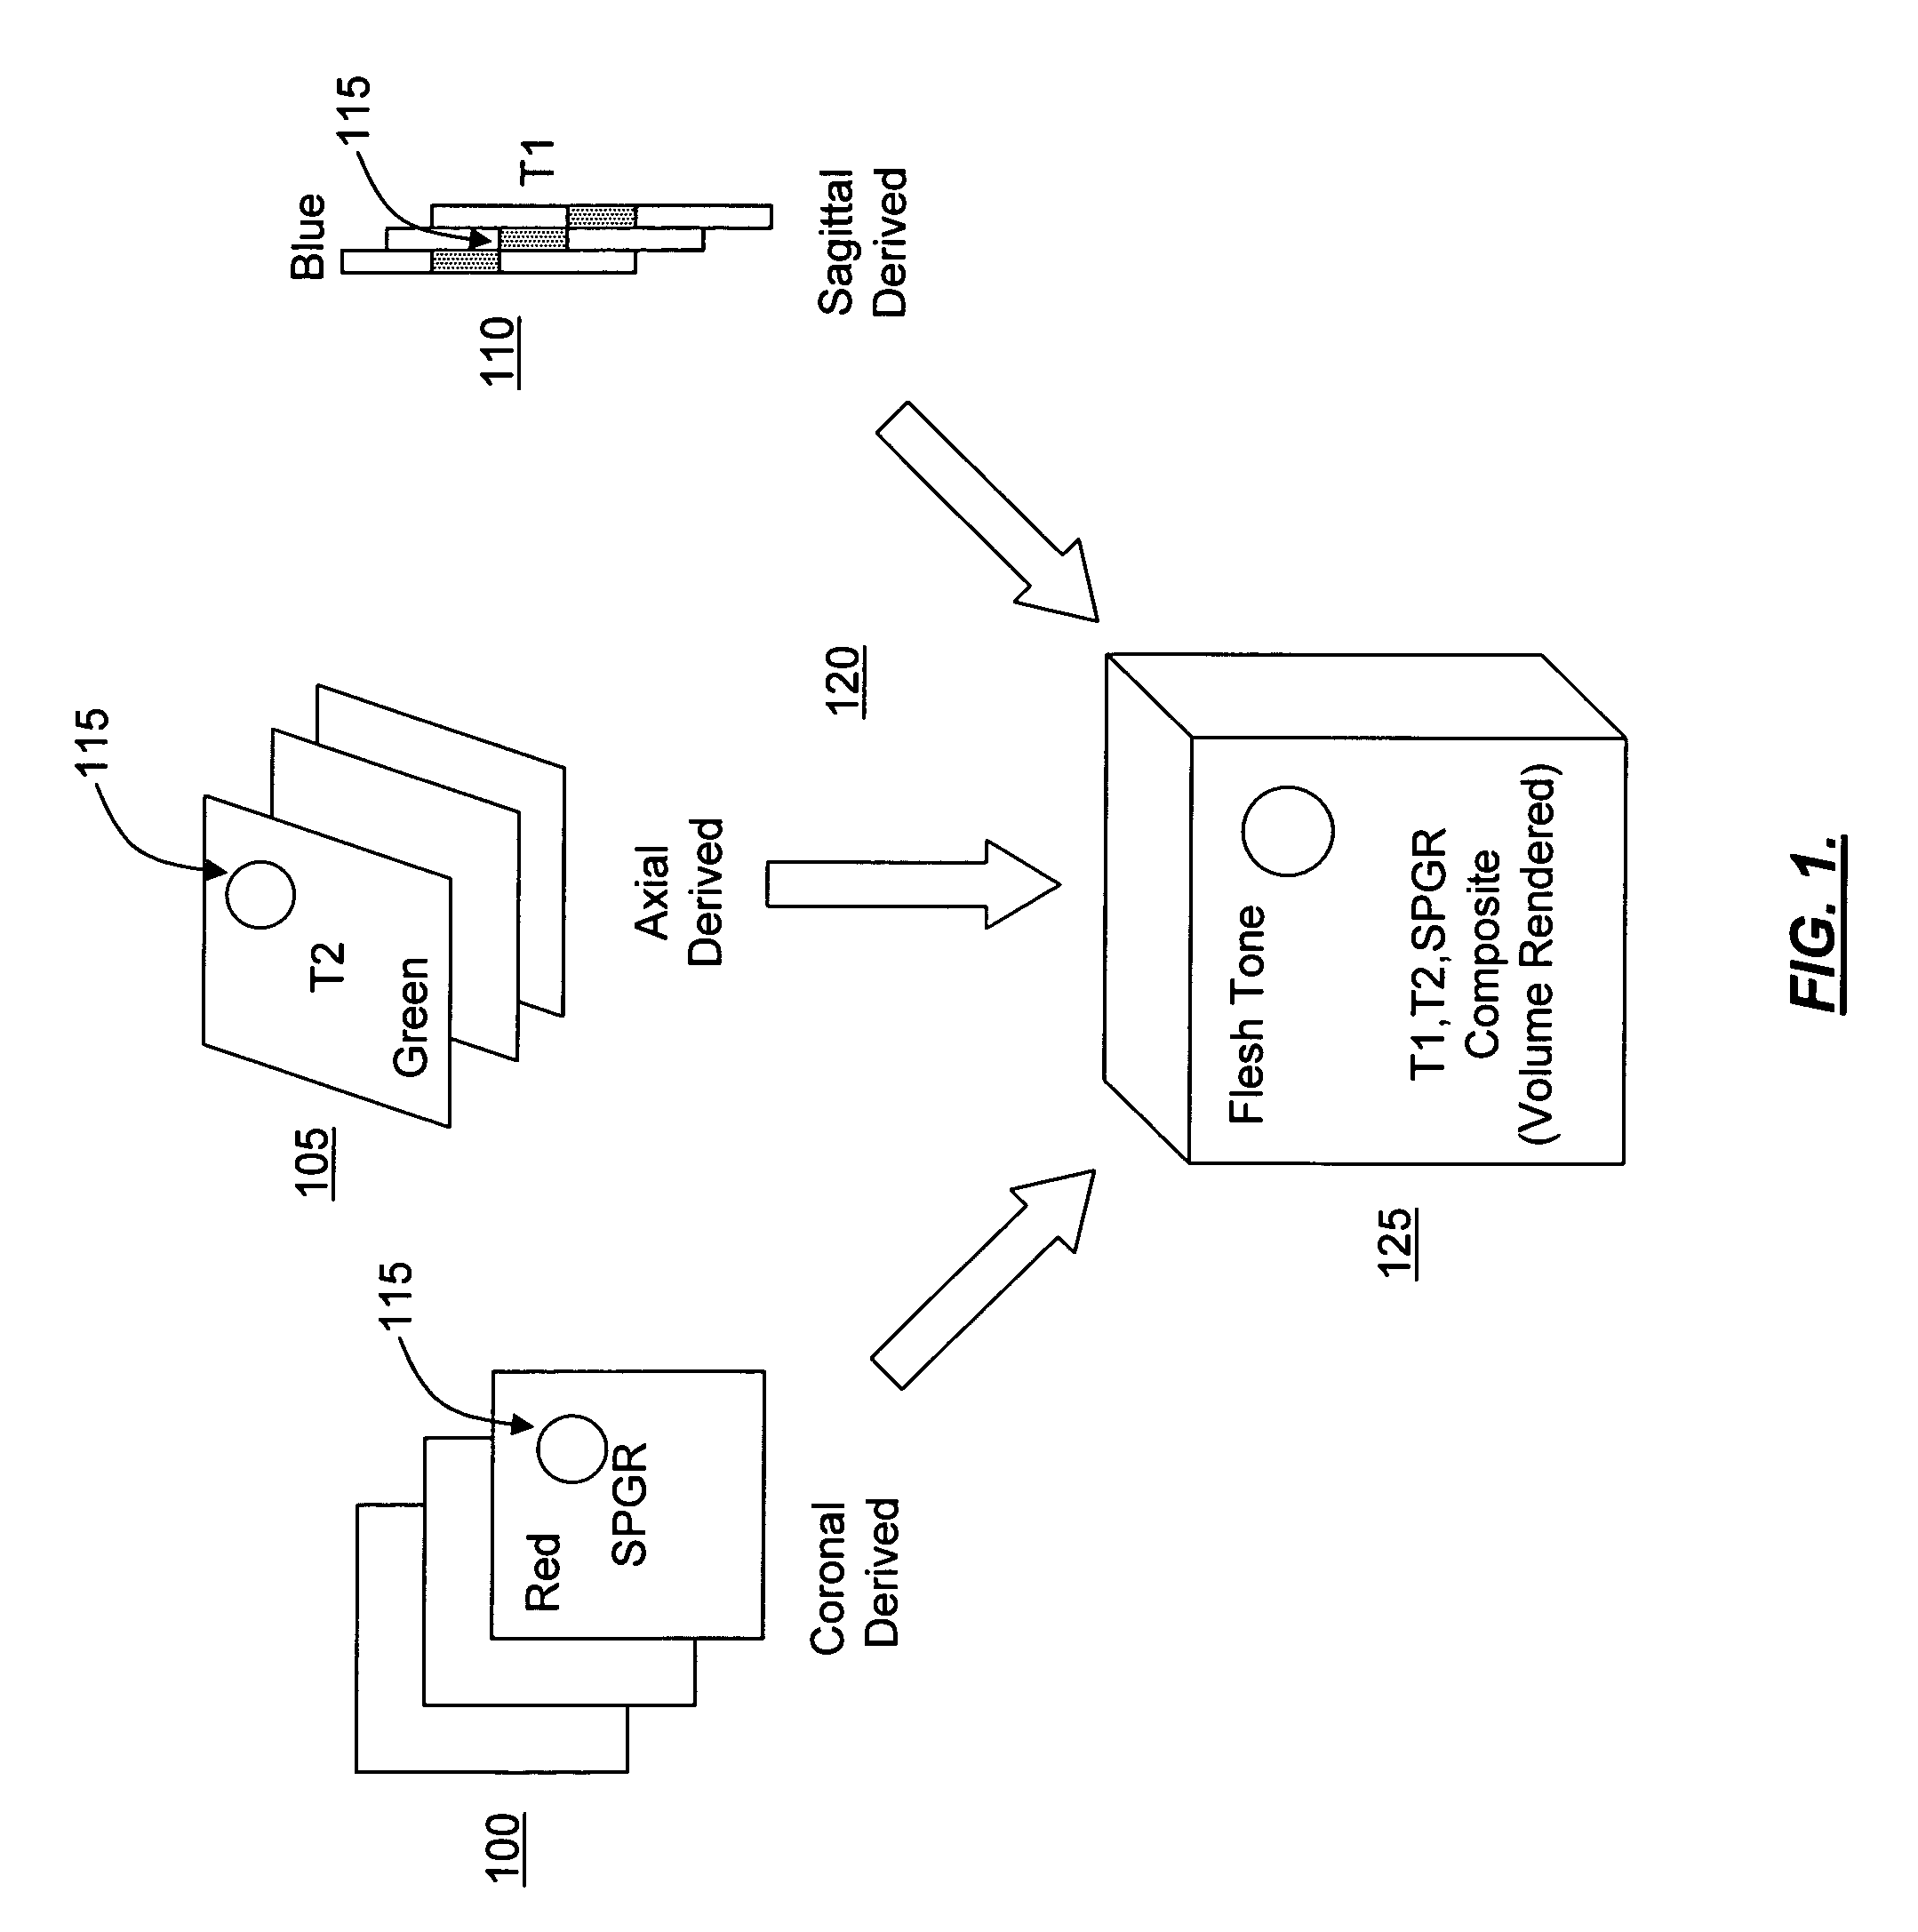 Opposed orthogonal fusion system and method for generating color segmented MRI voxel matrices